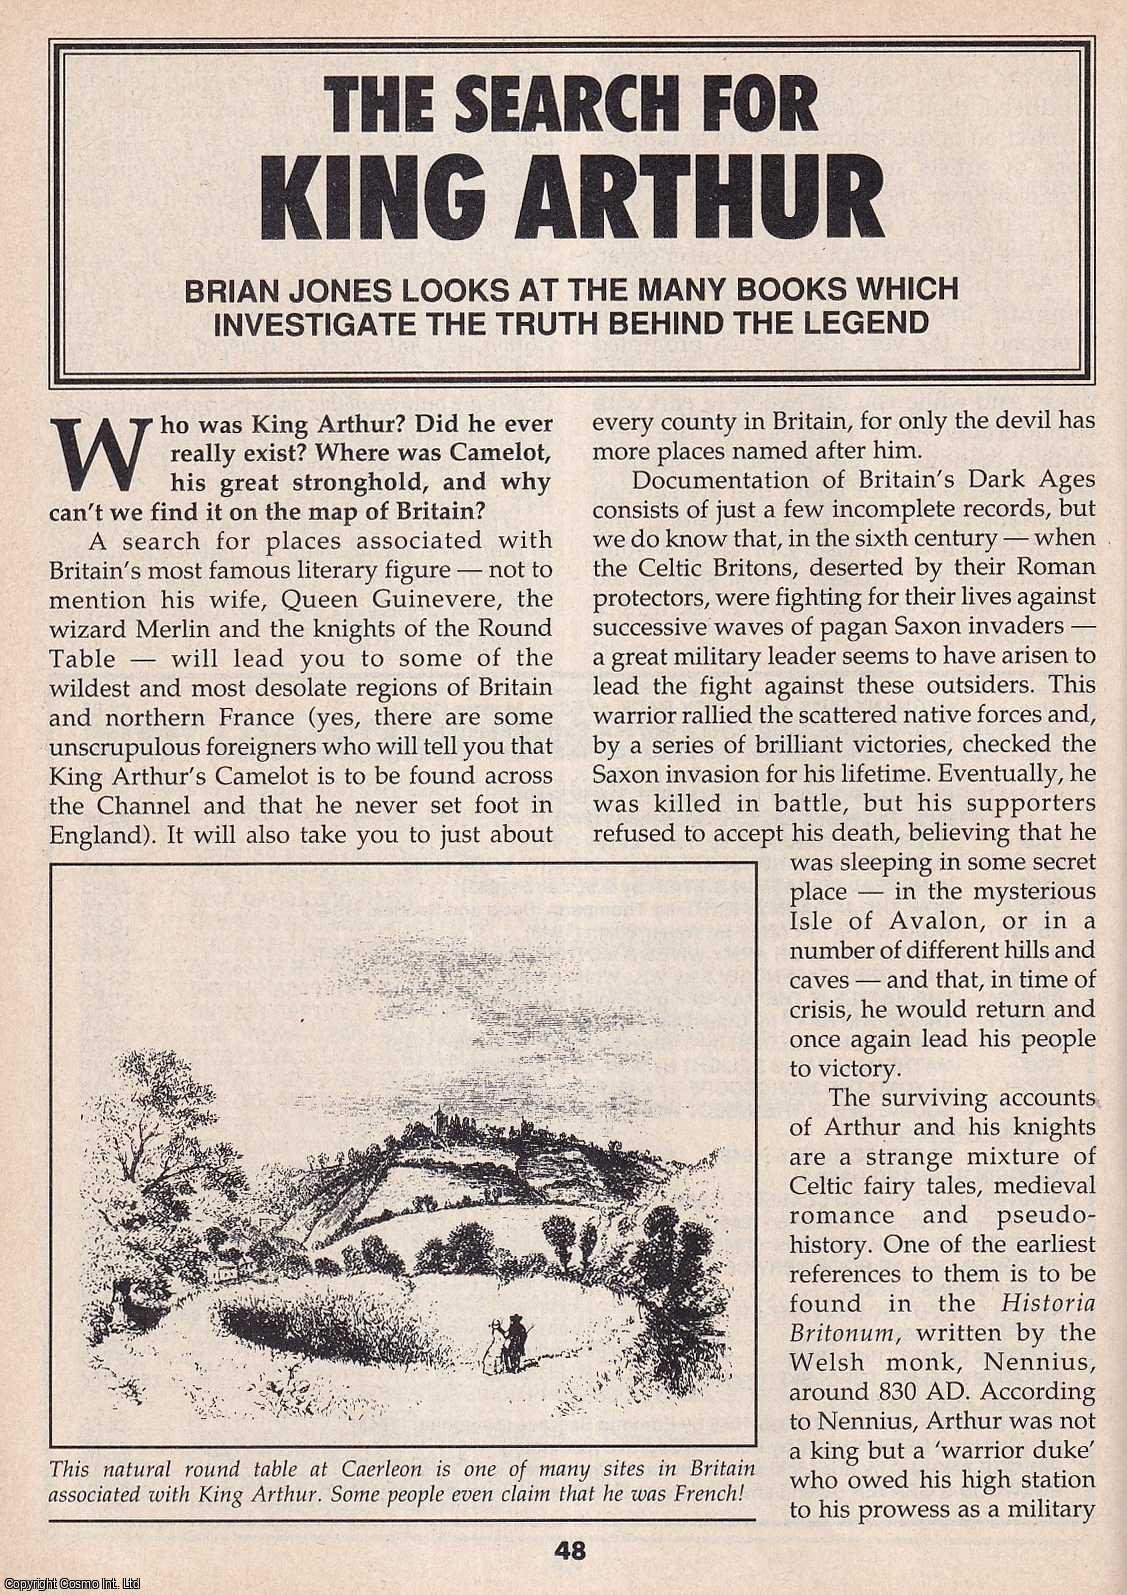 Brian Jones - The Search for King Arthur : The Truth behind The Legend. This is an original article separated from an issue of The Book & Magazine Collector publication.